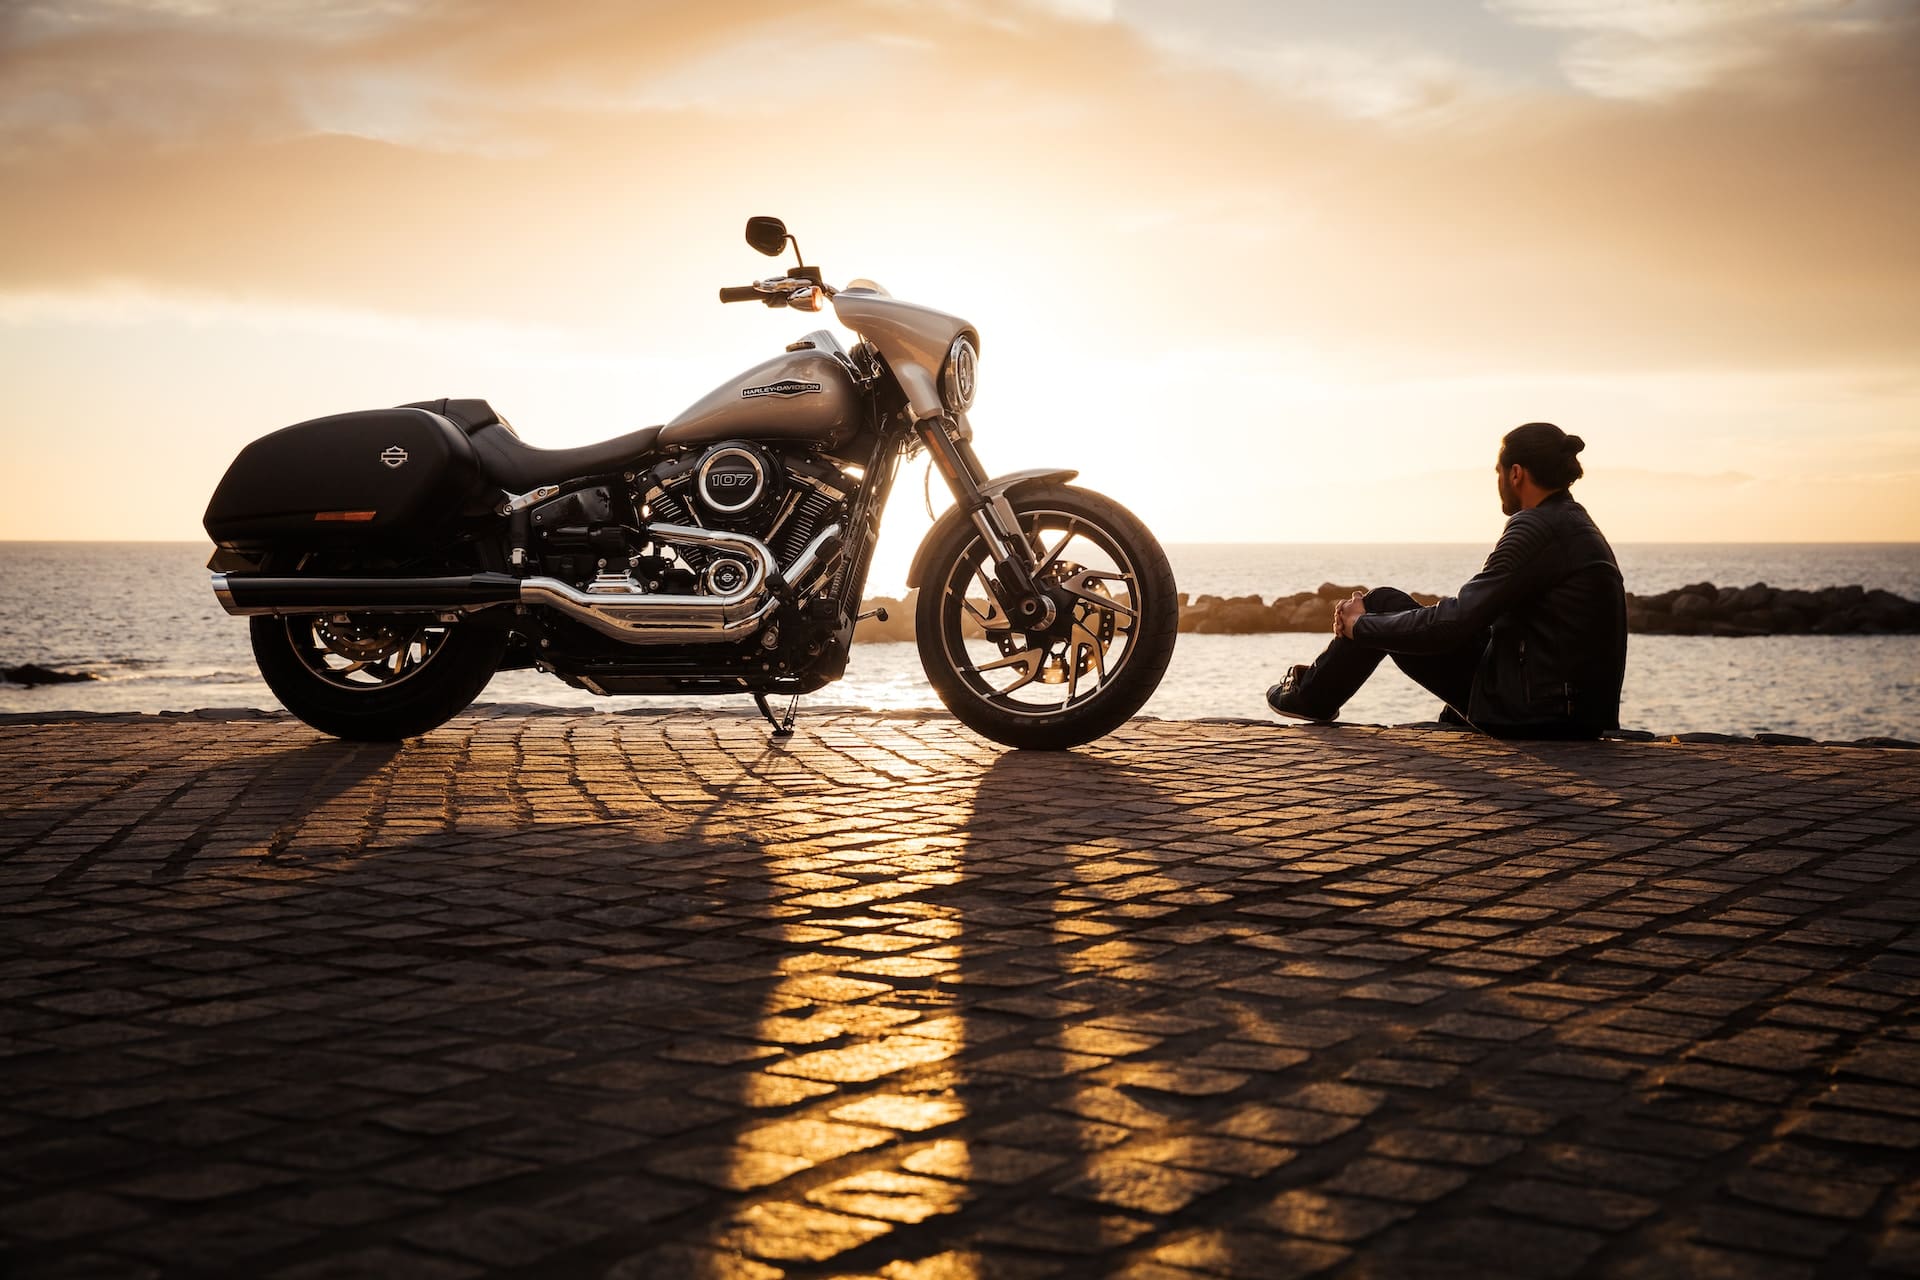 Harley davidson bike next to its rider sitting on a brick road overlooking an ocean view sunset